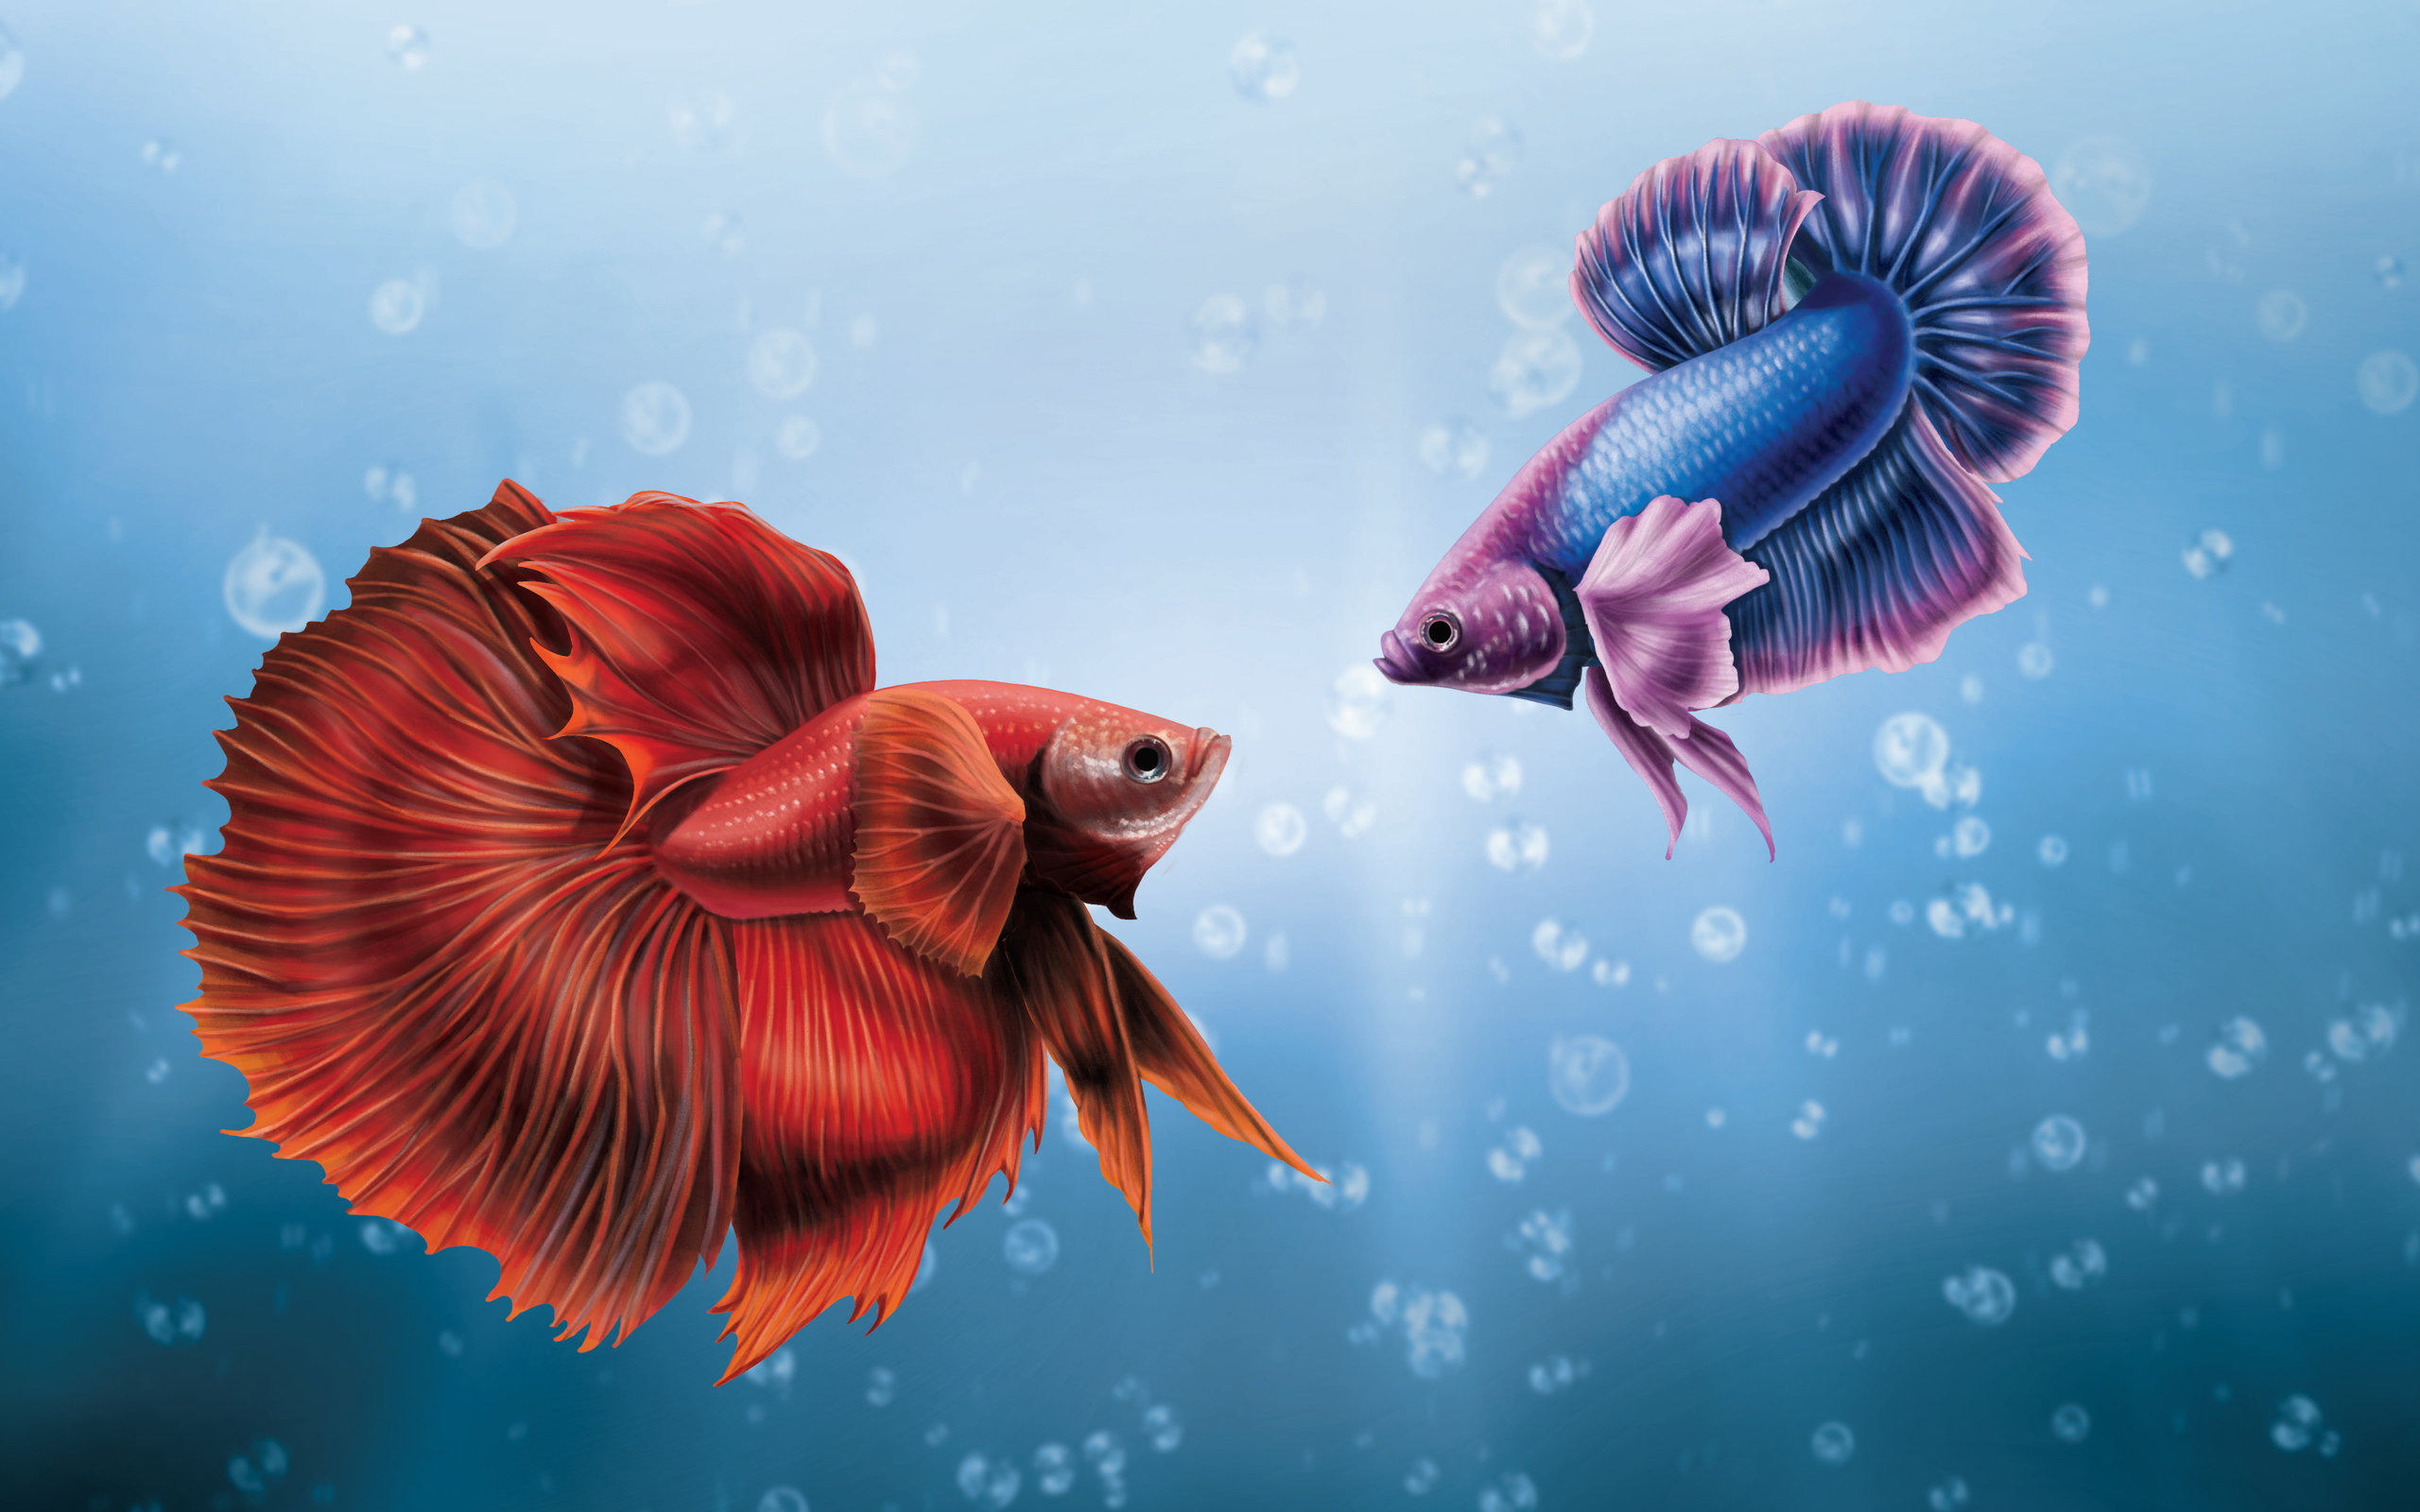 Betta Fish Wallpapers HD ! on the App Store